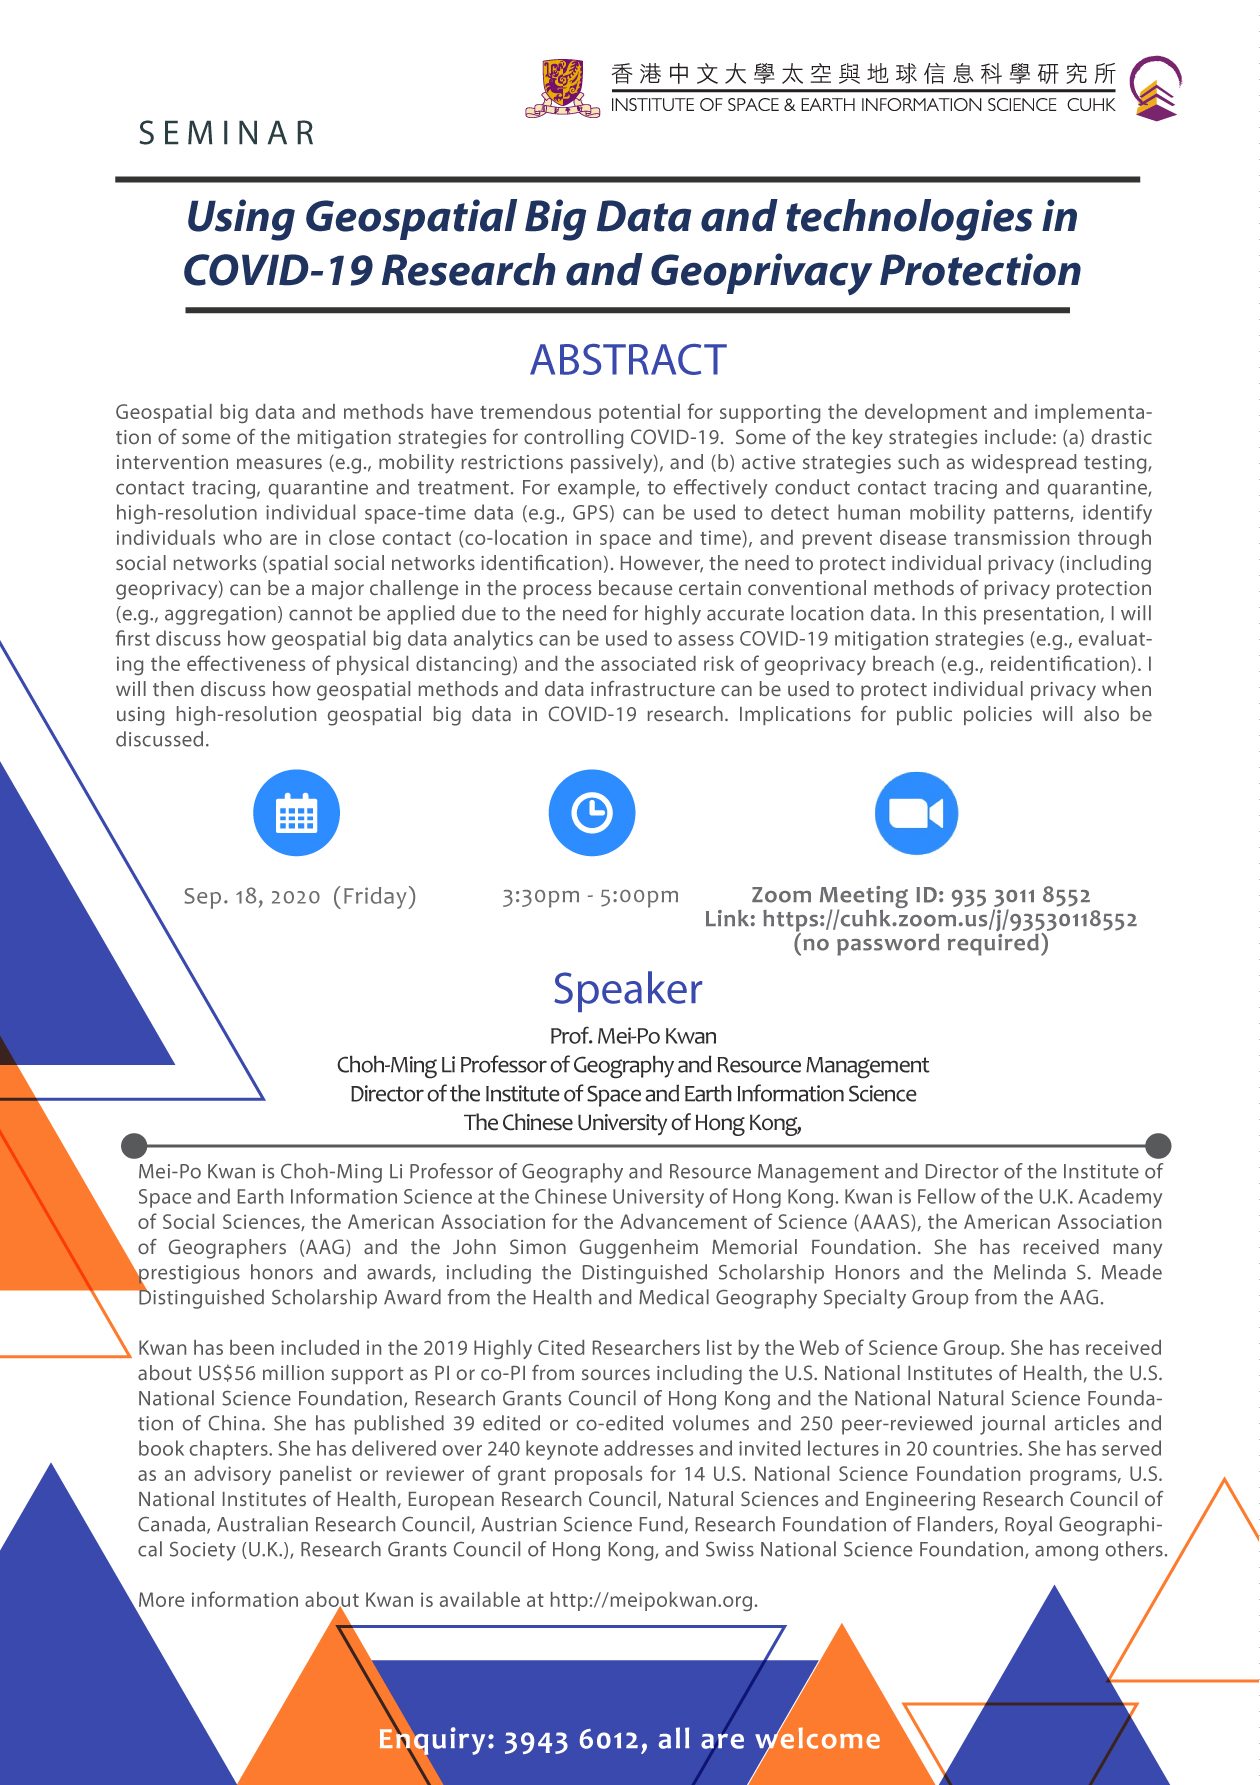 Using Geospatial Big Data and technologies in COVID-19 Research and Geoprivacy Protection